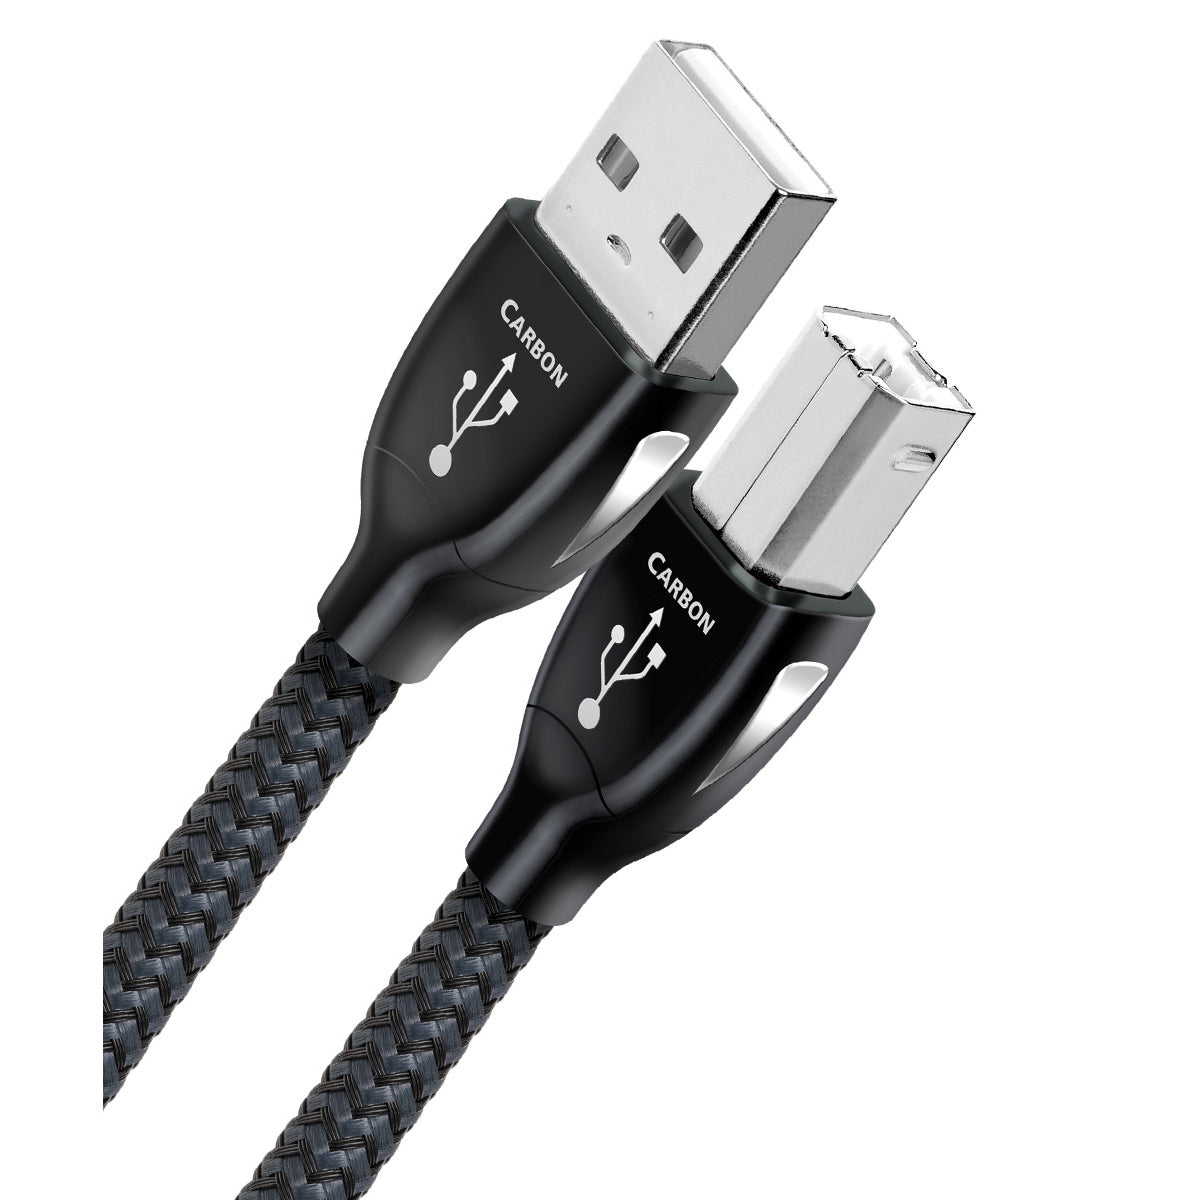 AudioQuest Carbon USB A to USB B Cable - 2.46 ft. (.75)